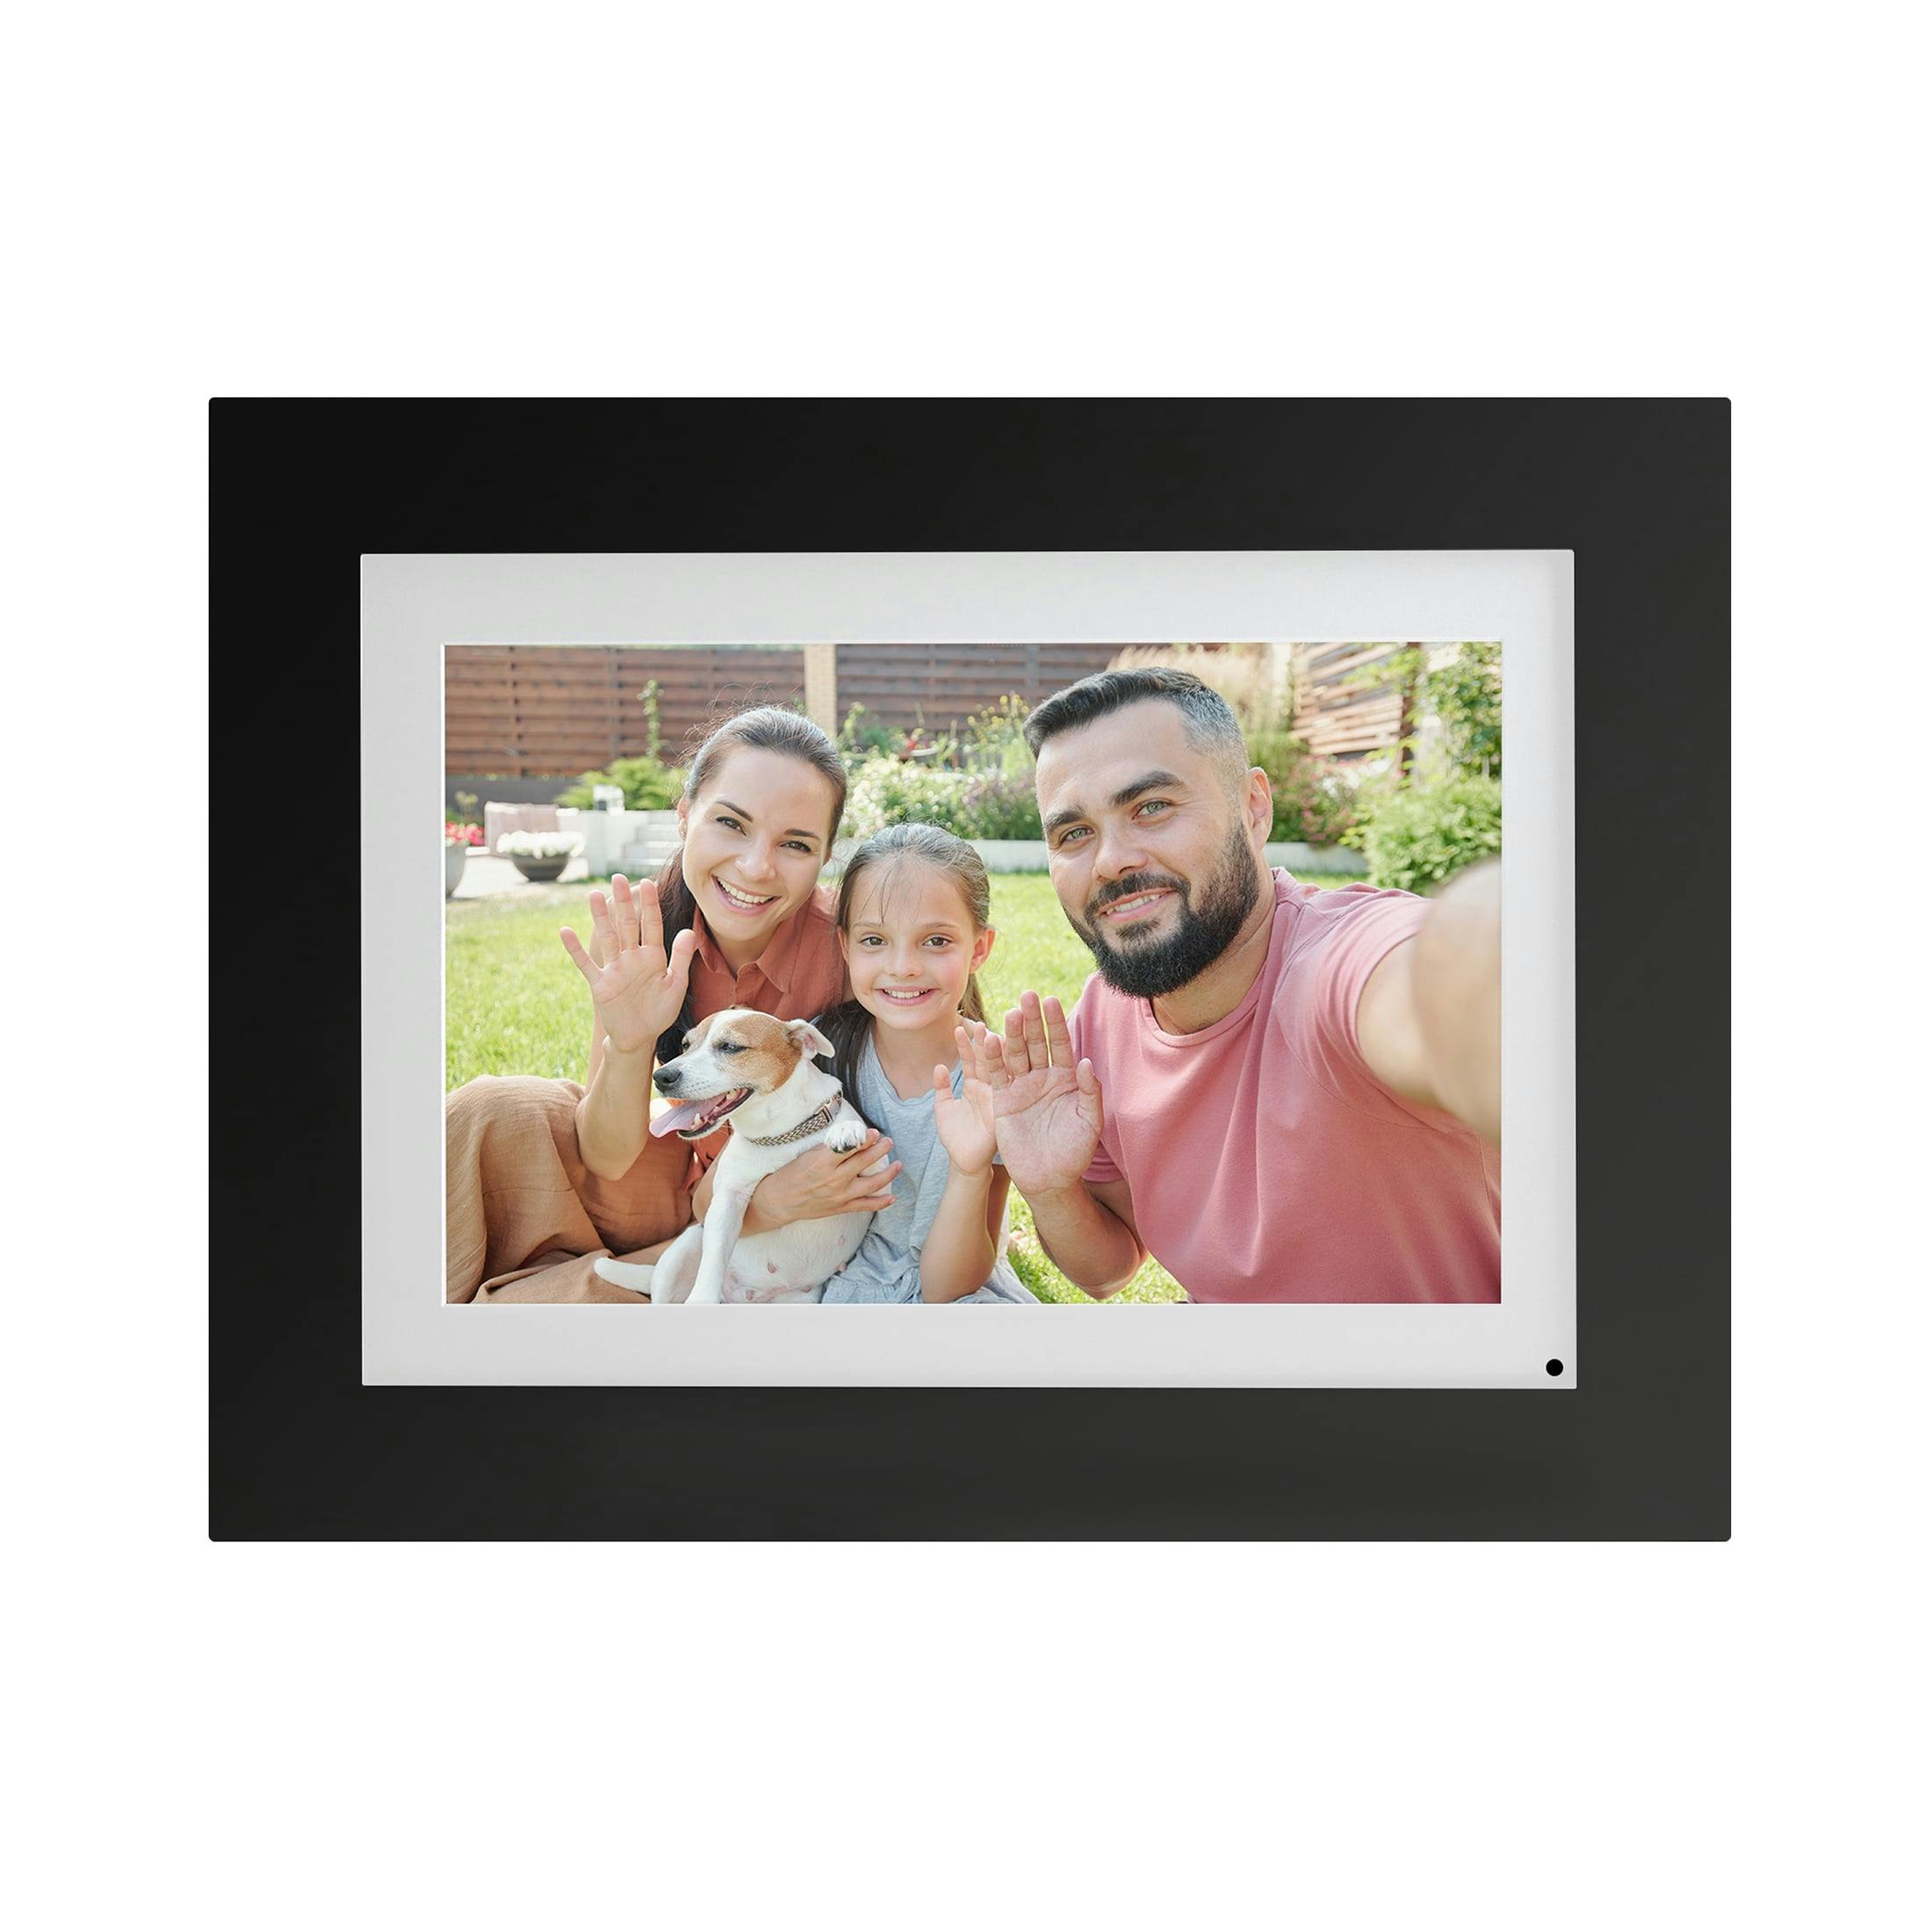 PhotoShare 8" Black Smart Digital Picture Frame with HD Touchscreen